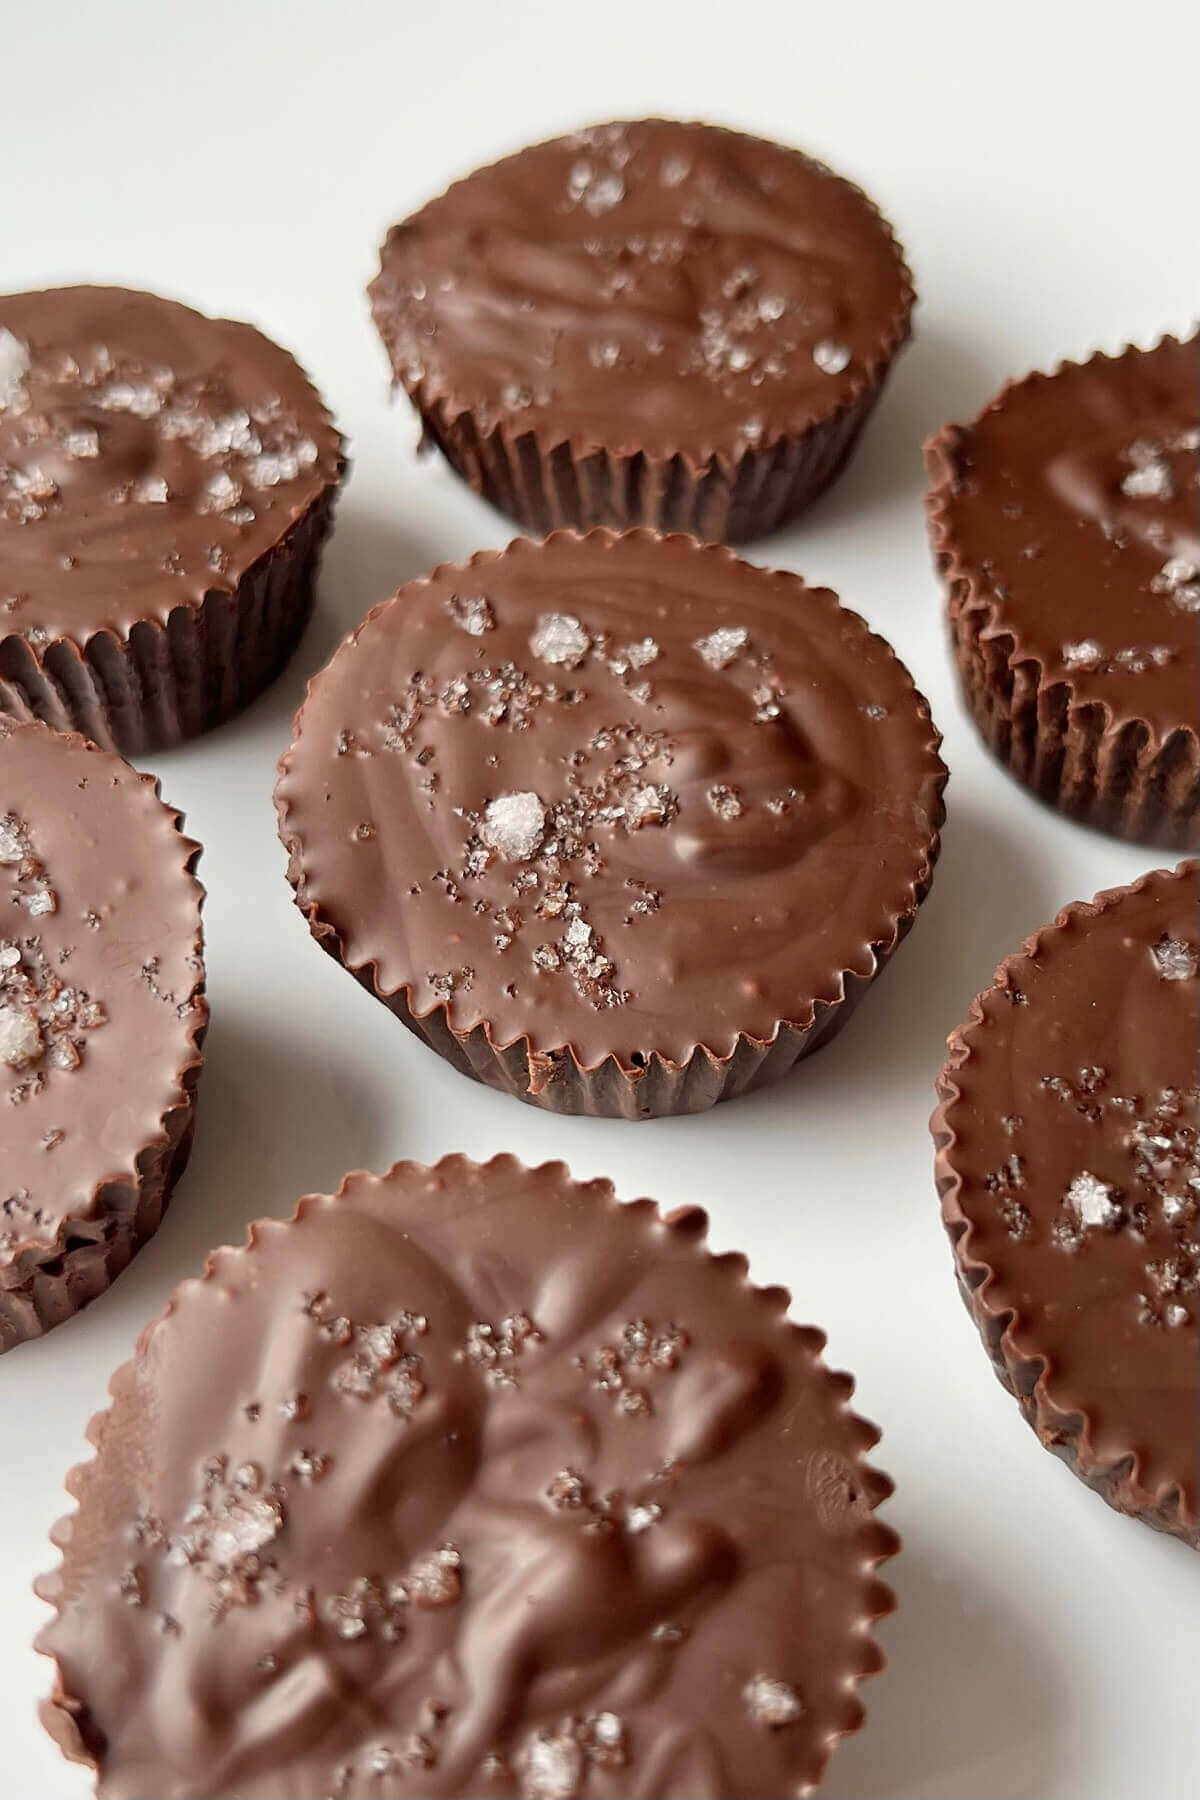 Dark chocolate truffle peanut butter cups on a white plate.